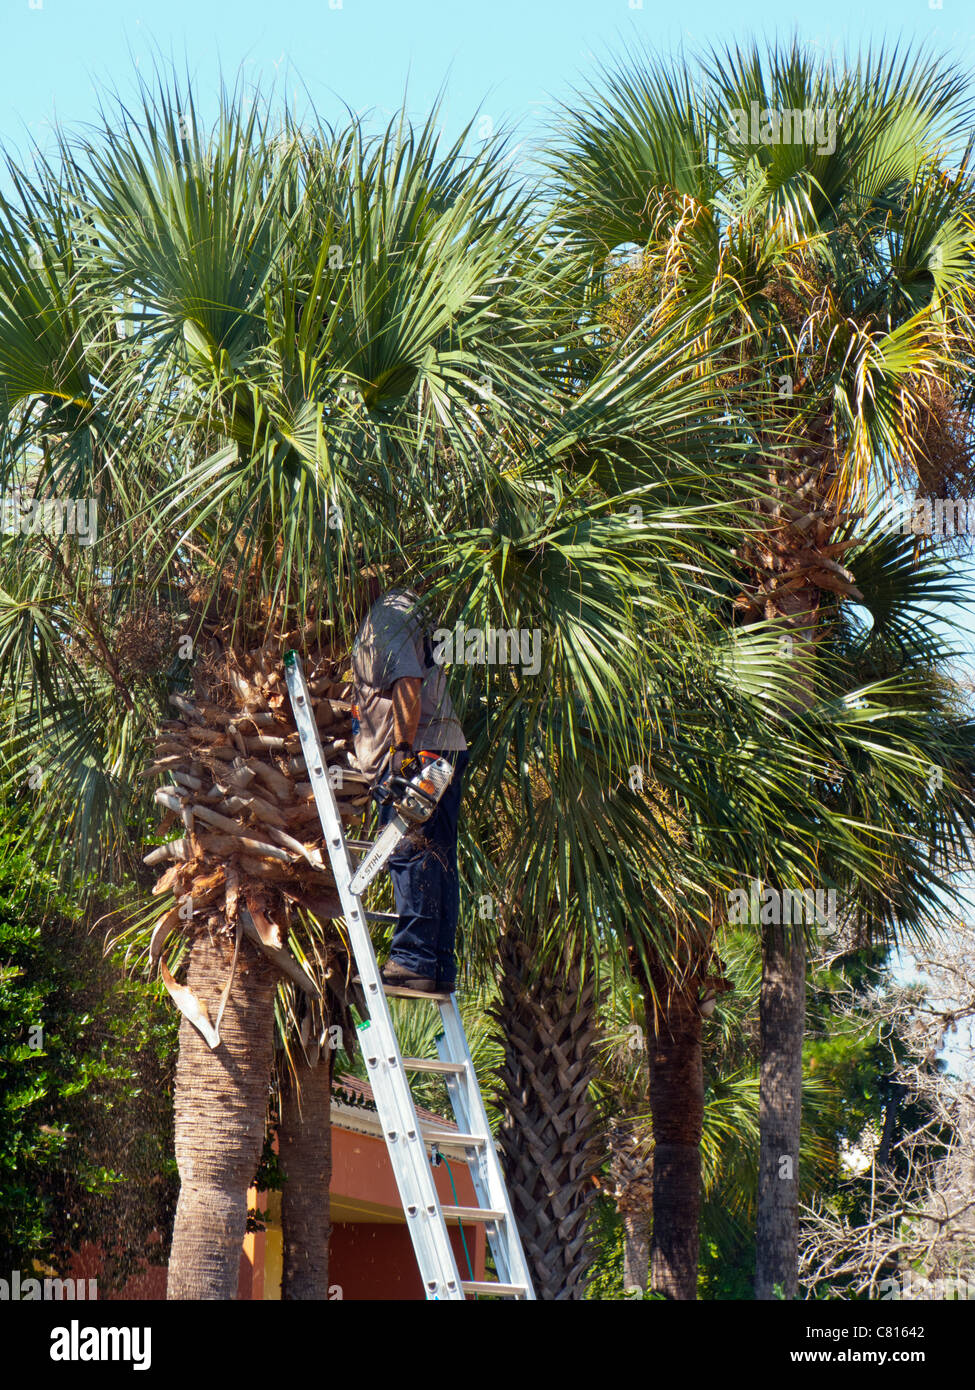 MAN UP A LADDER TRIMMING PALM TREE Stock Photo